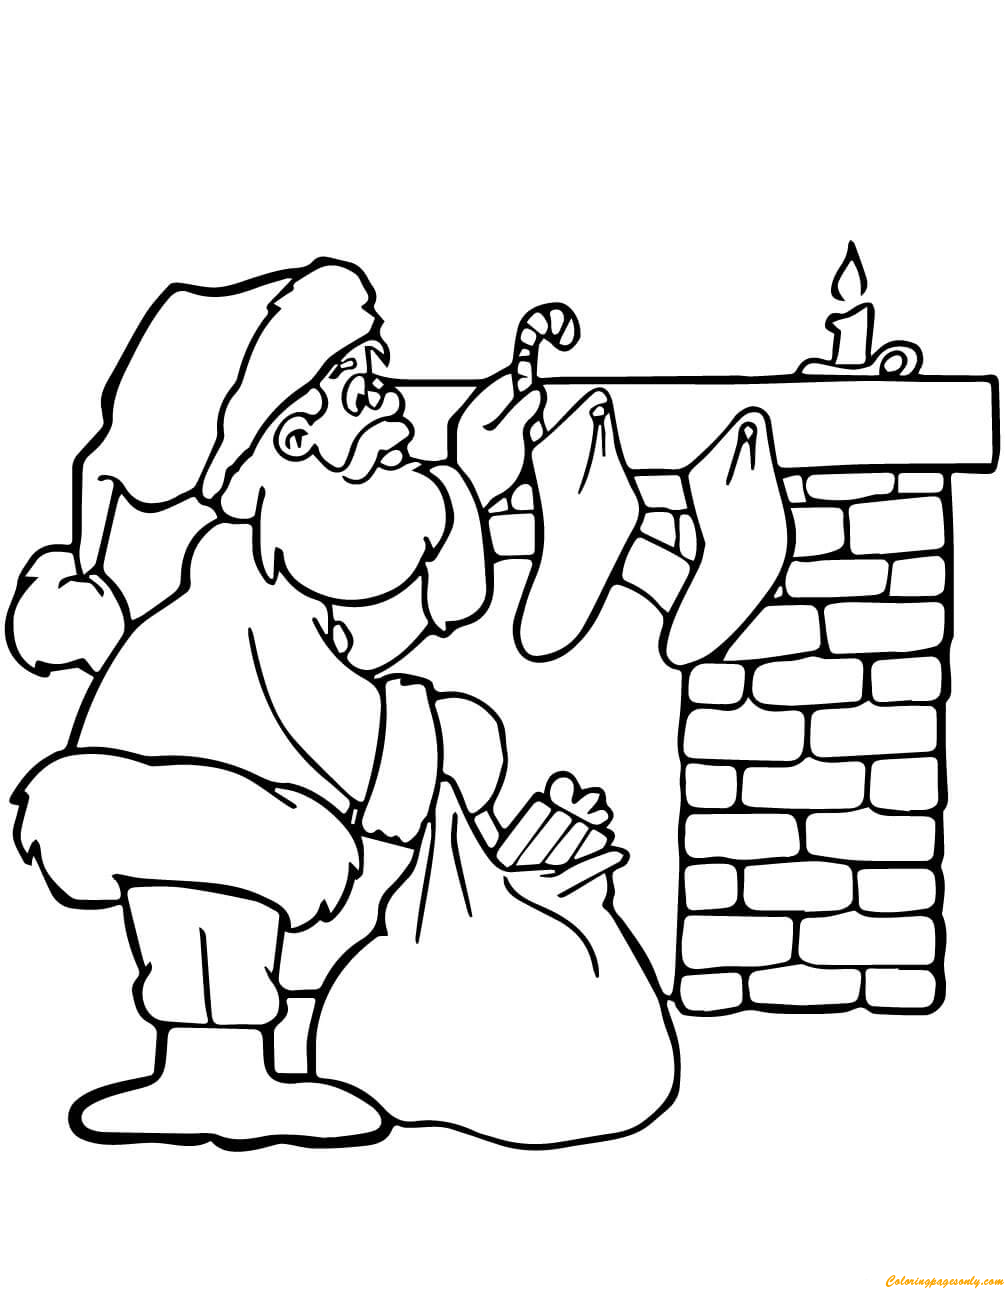 Santa Putting Gifts Coloring Page - Free Coloring Pages Online